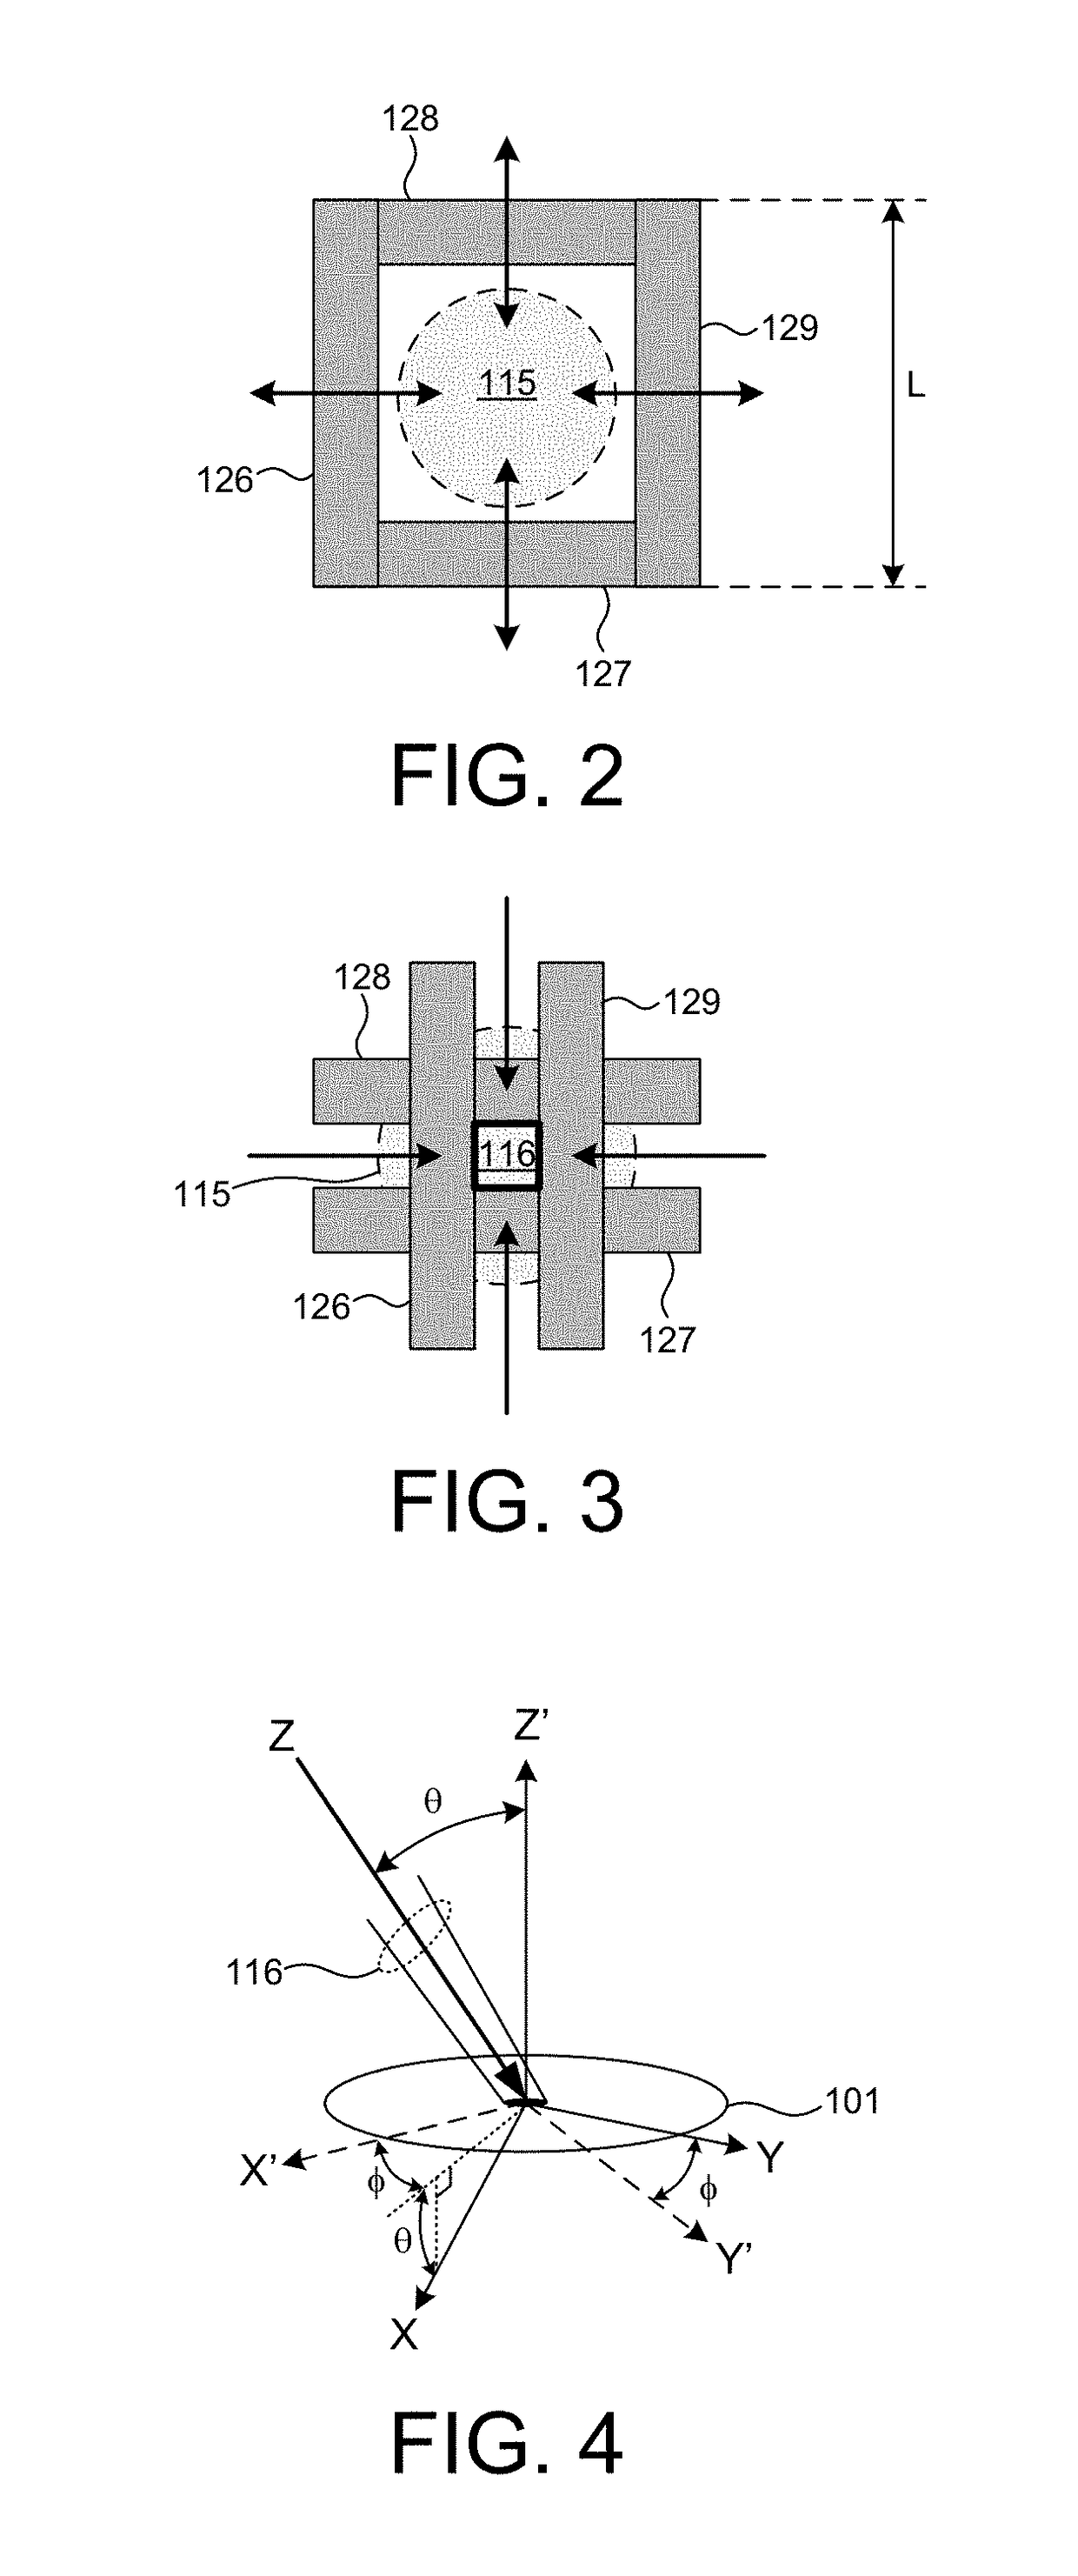 Methods And Systems For Characterization Of An X-Ray Beam With High Spatial Resolution